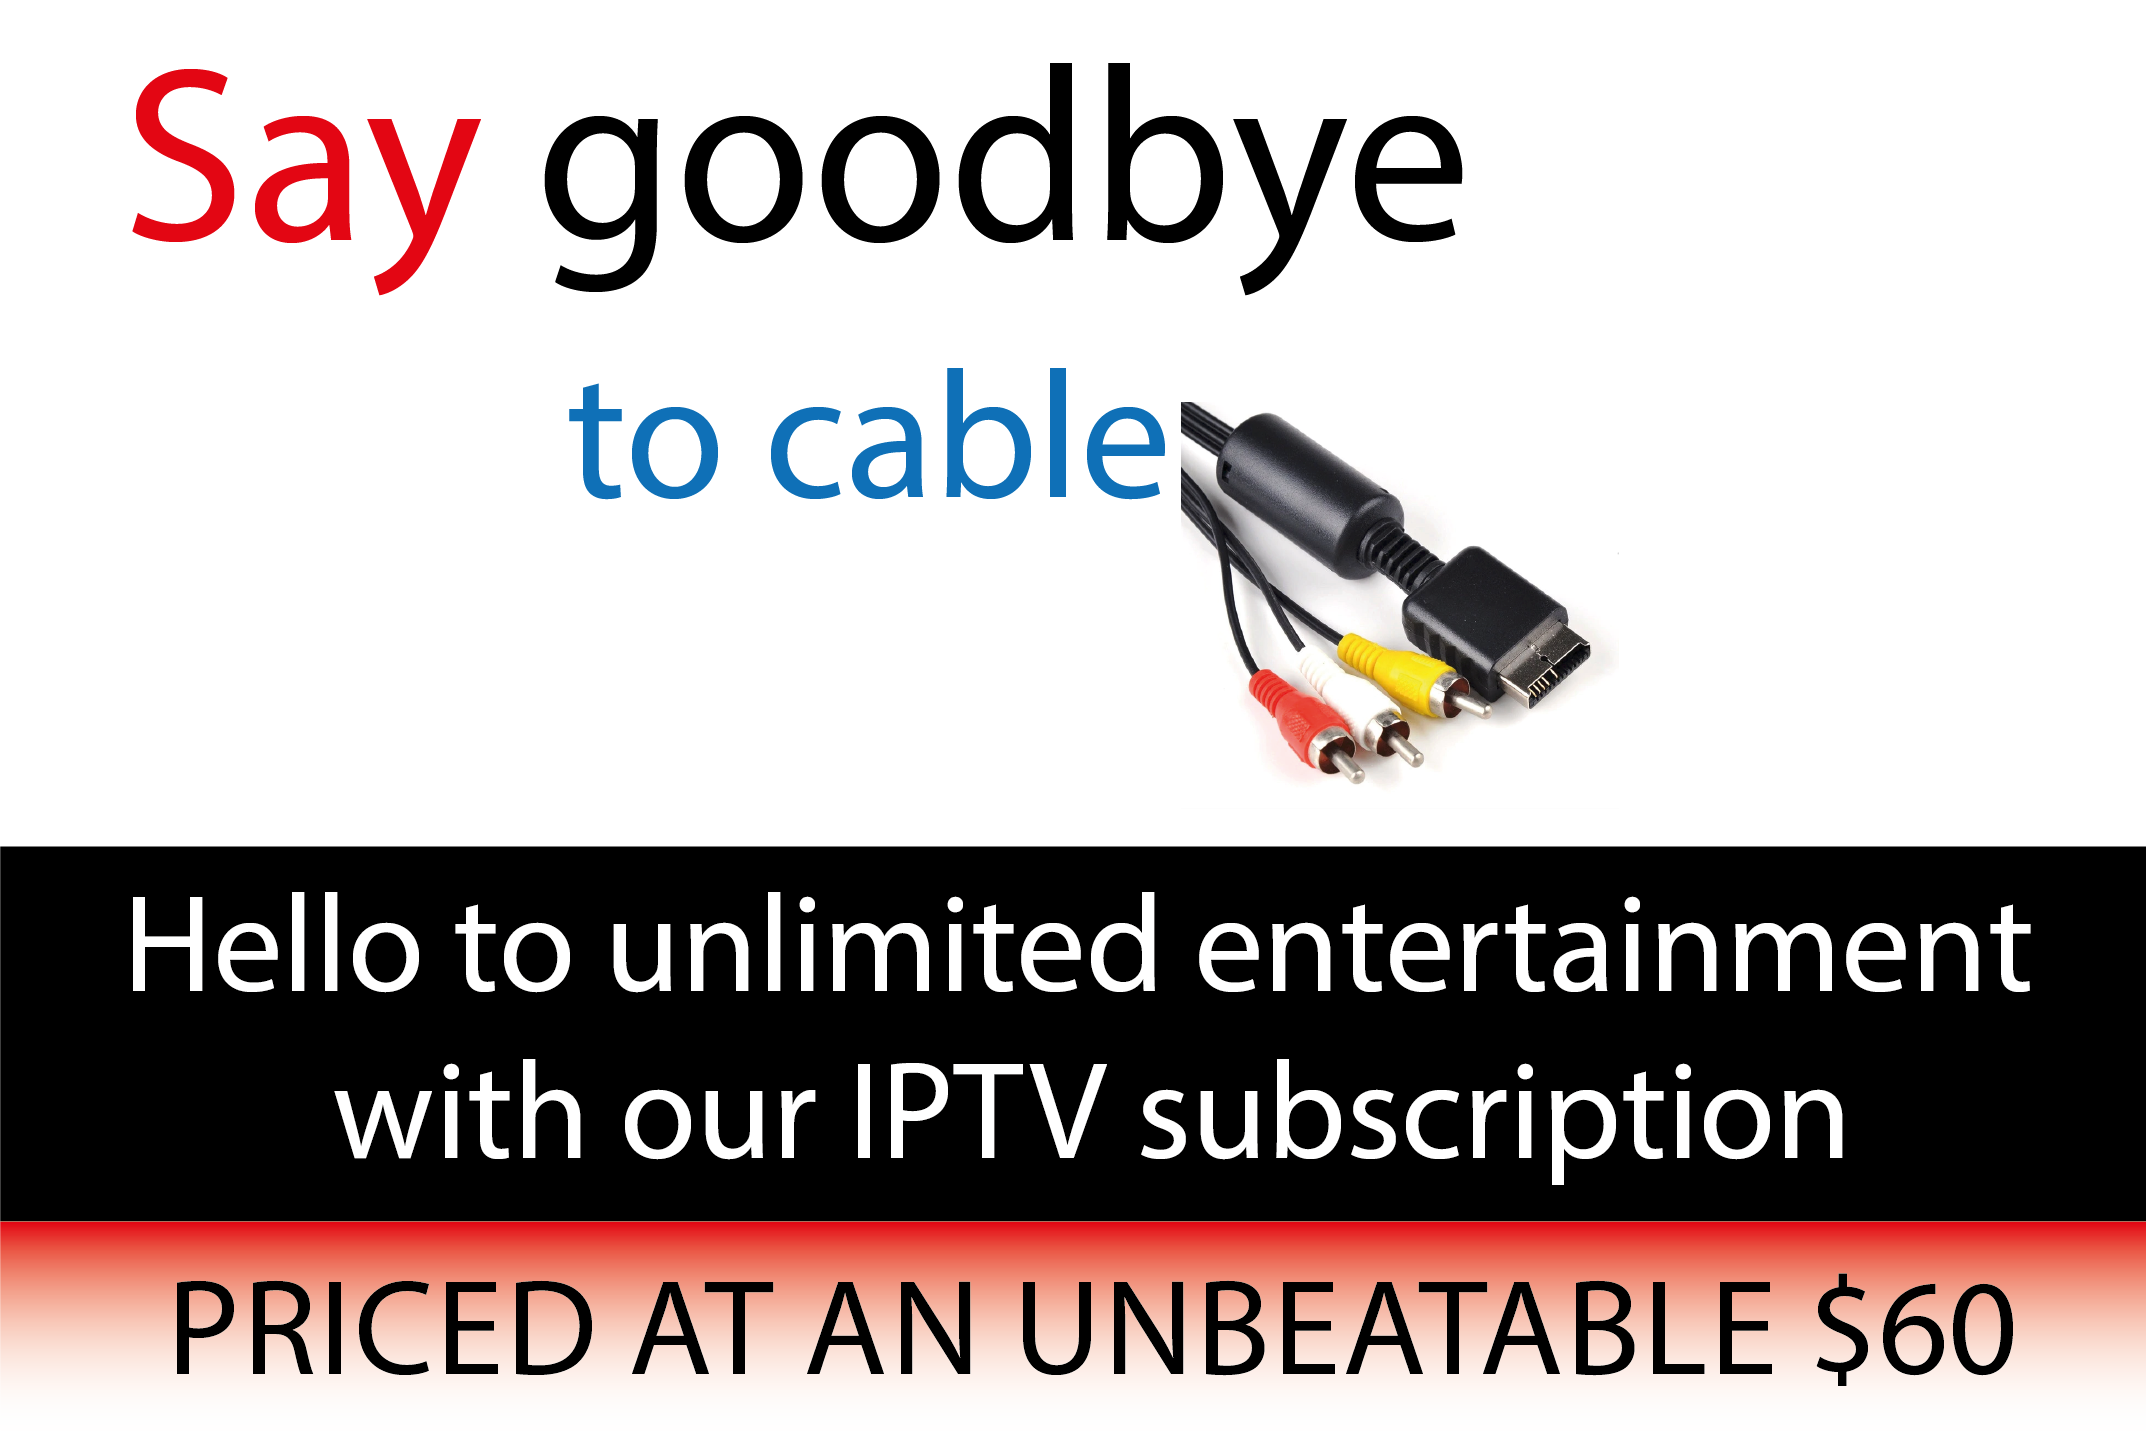 freeiptvtrial.com | offer of the day